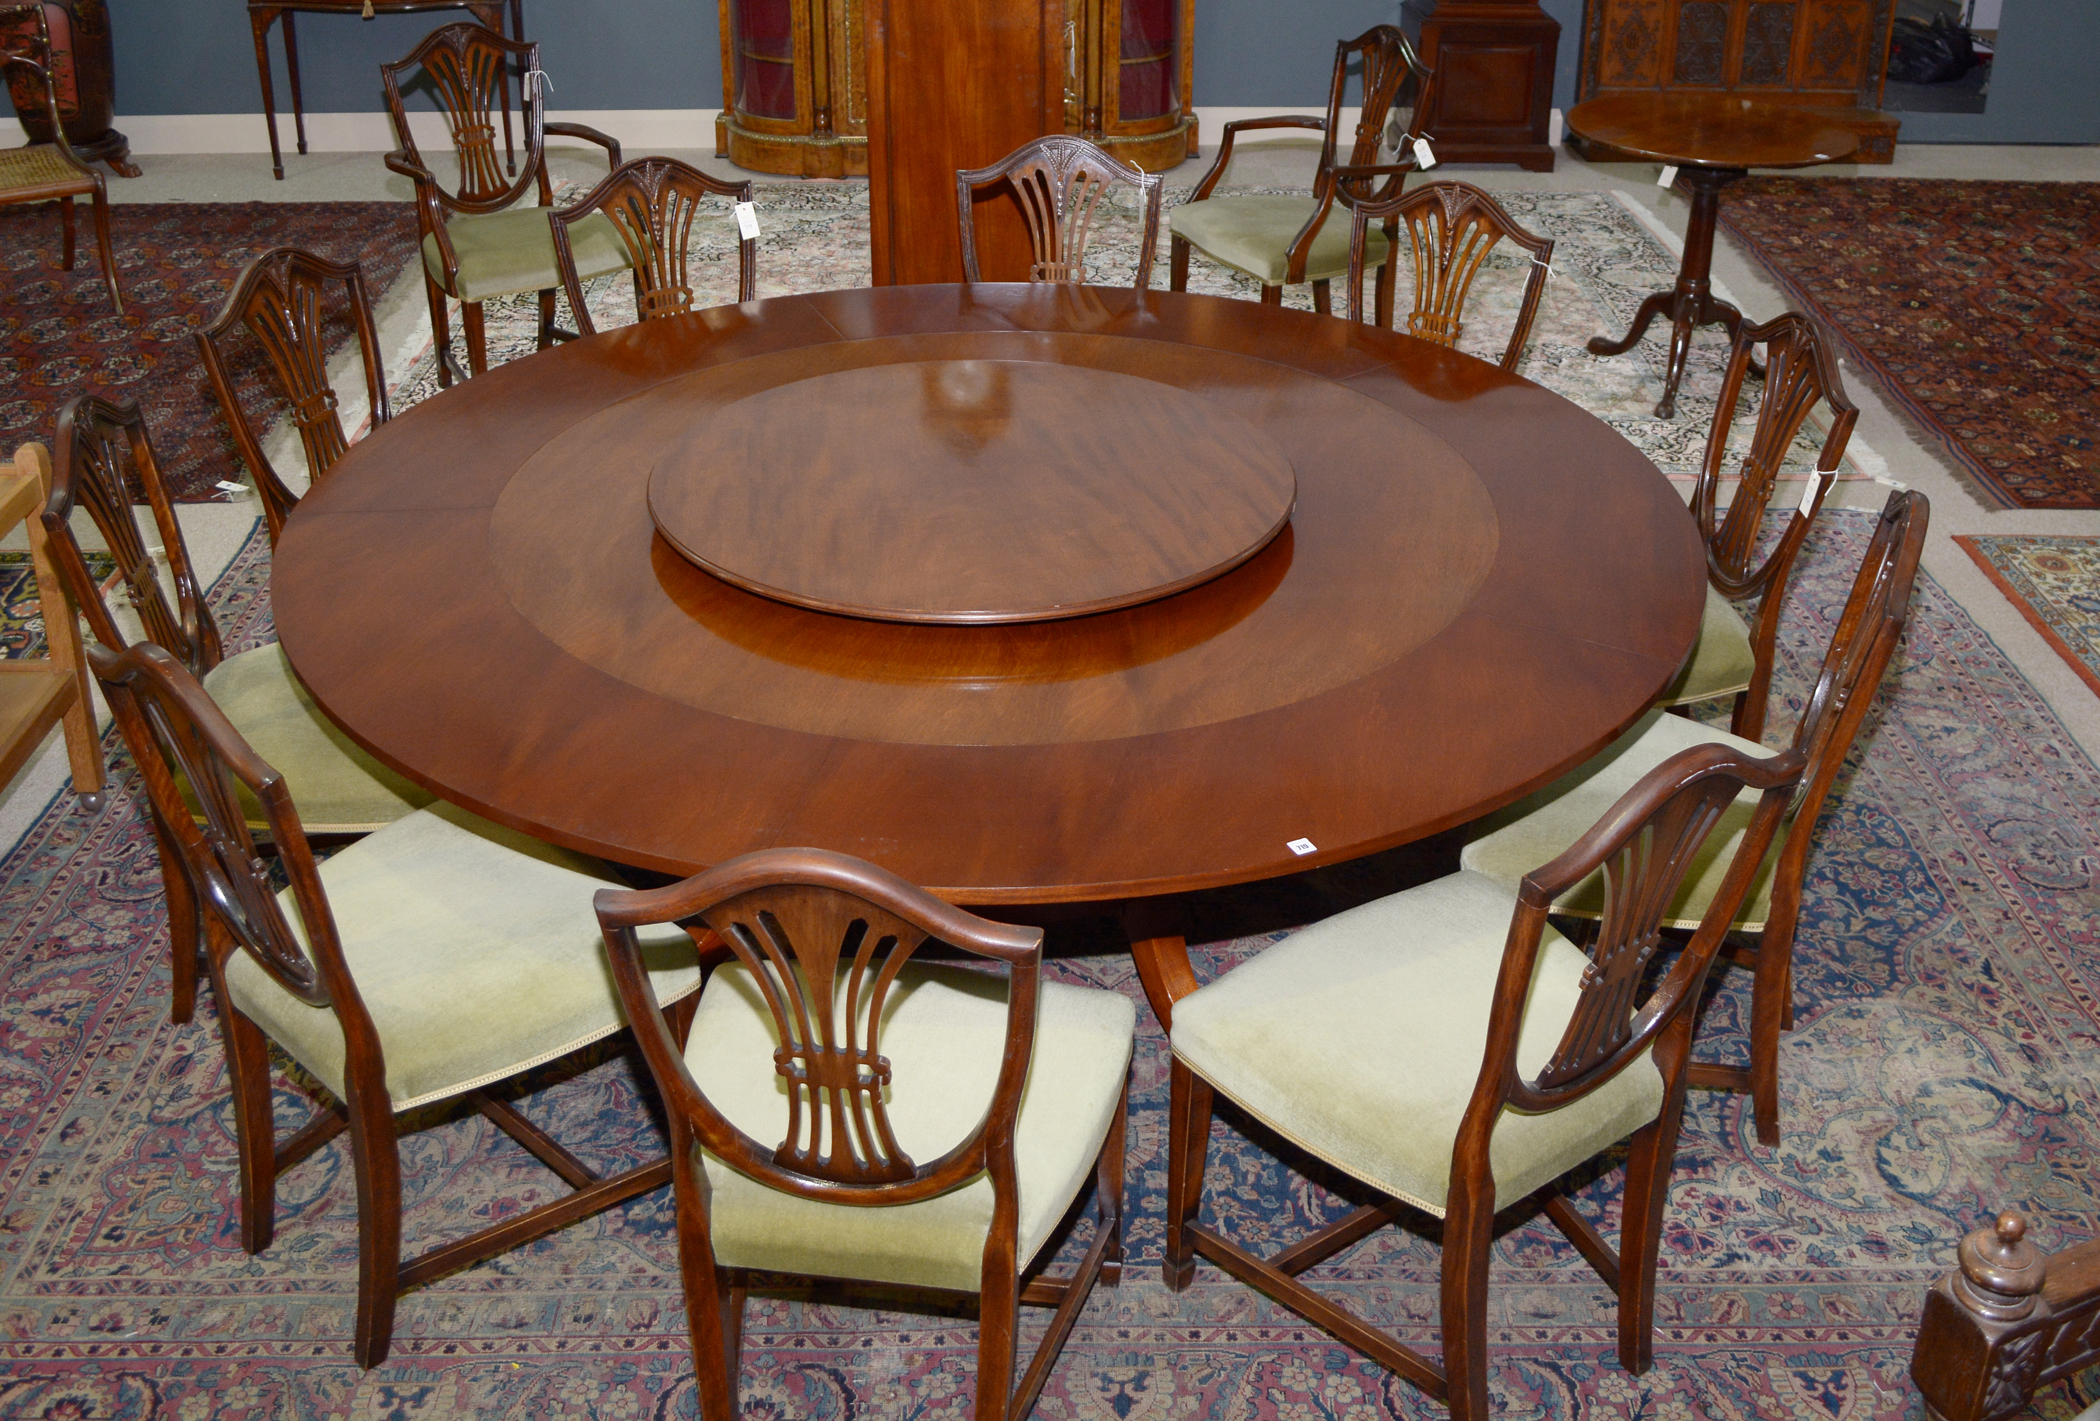 Chapmans 'Siesta' dining table., cabinet and twelve matching chairs